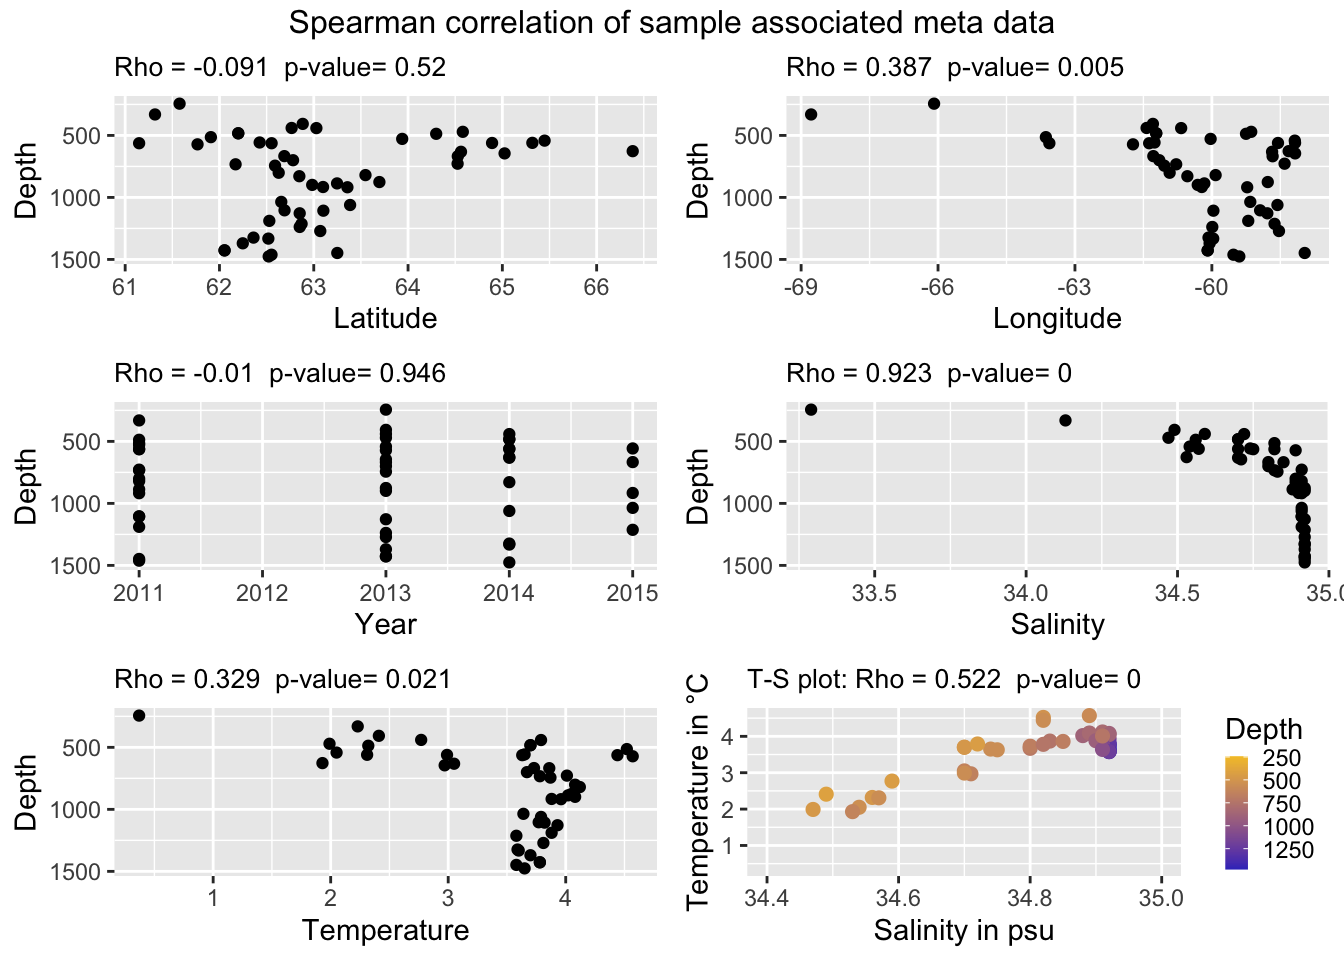 Correlation of depth with other environmental parameters/predictor variables across all samples.